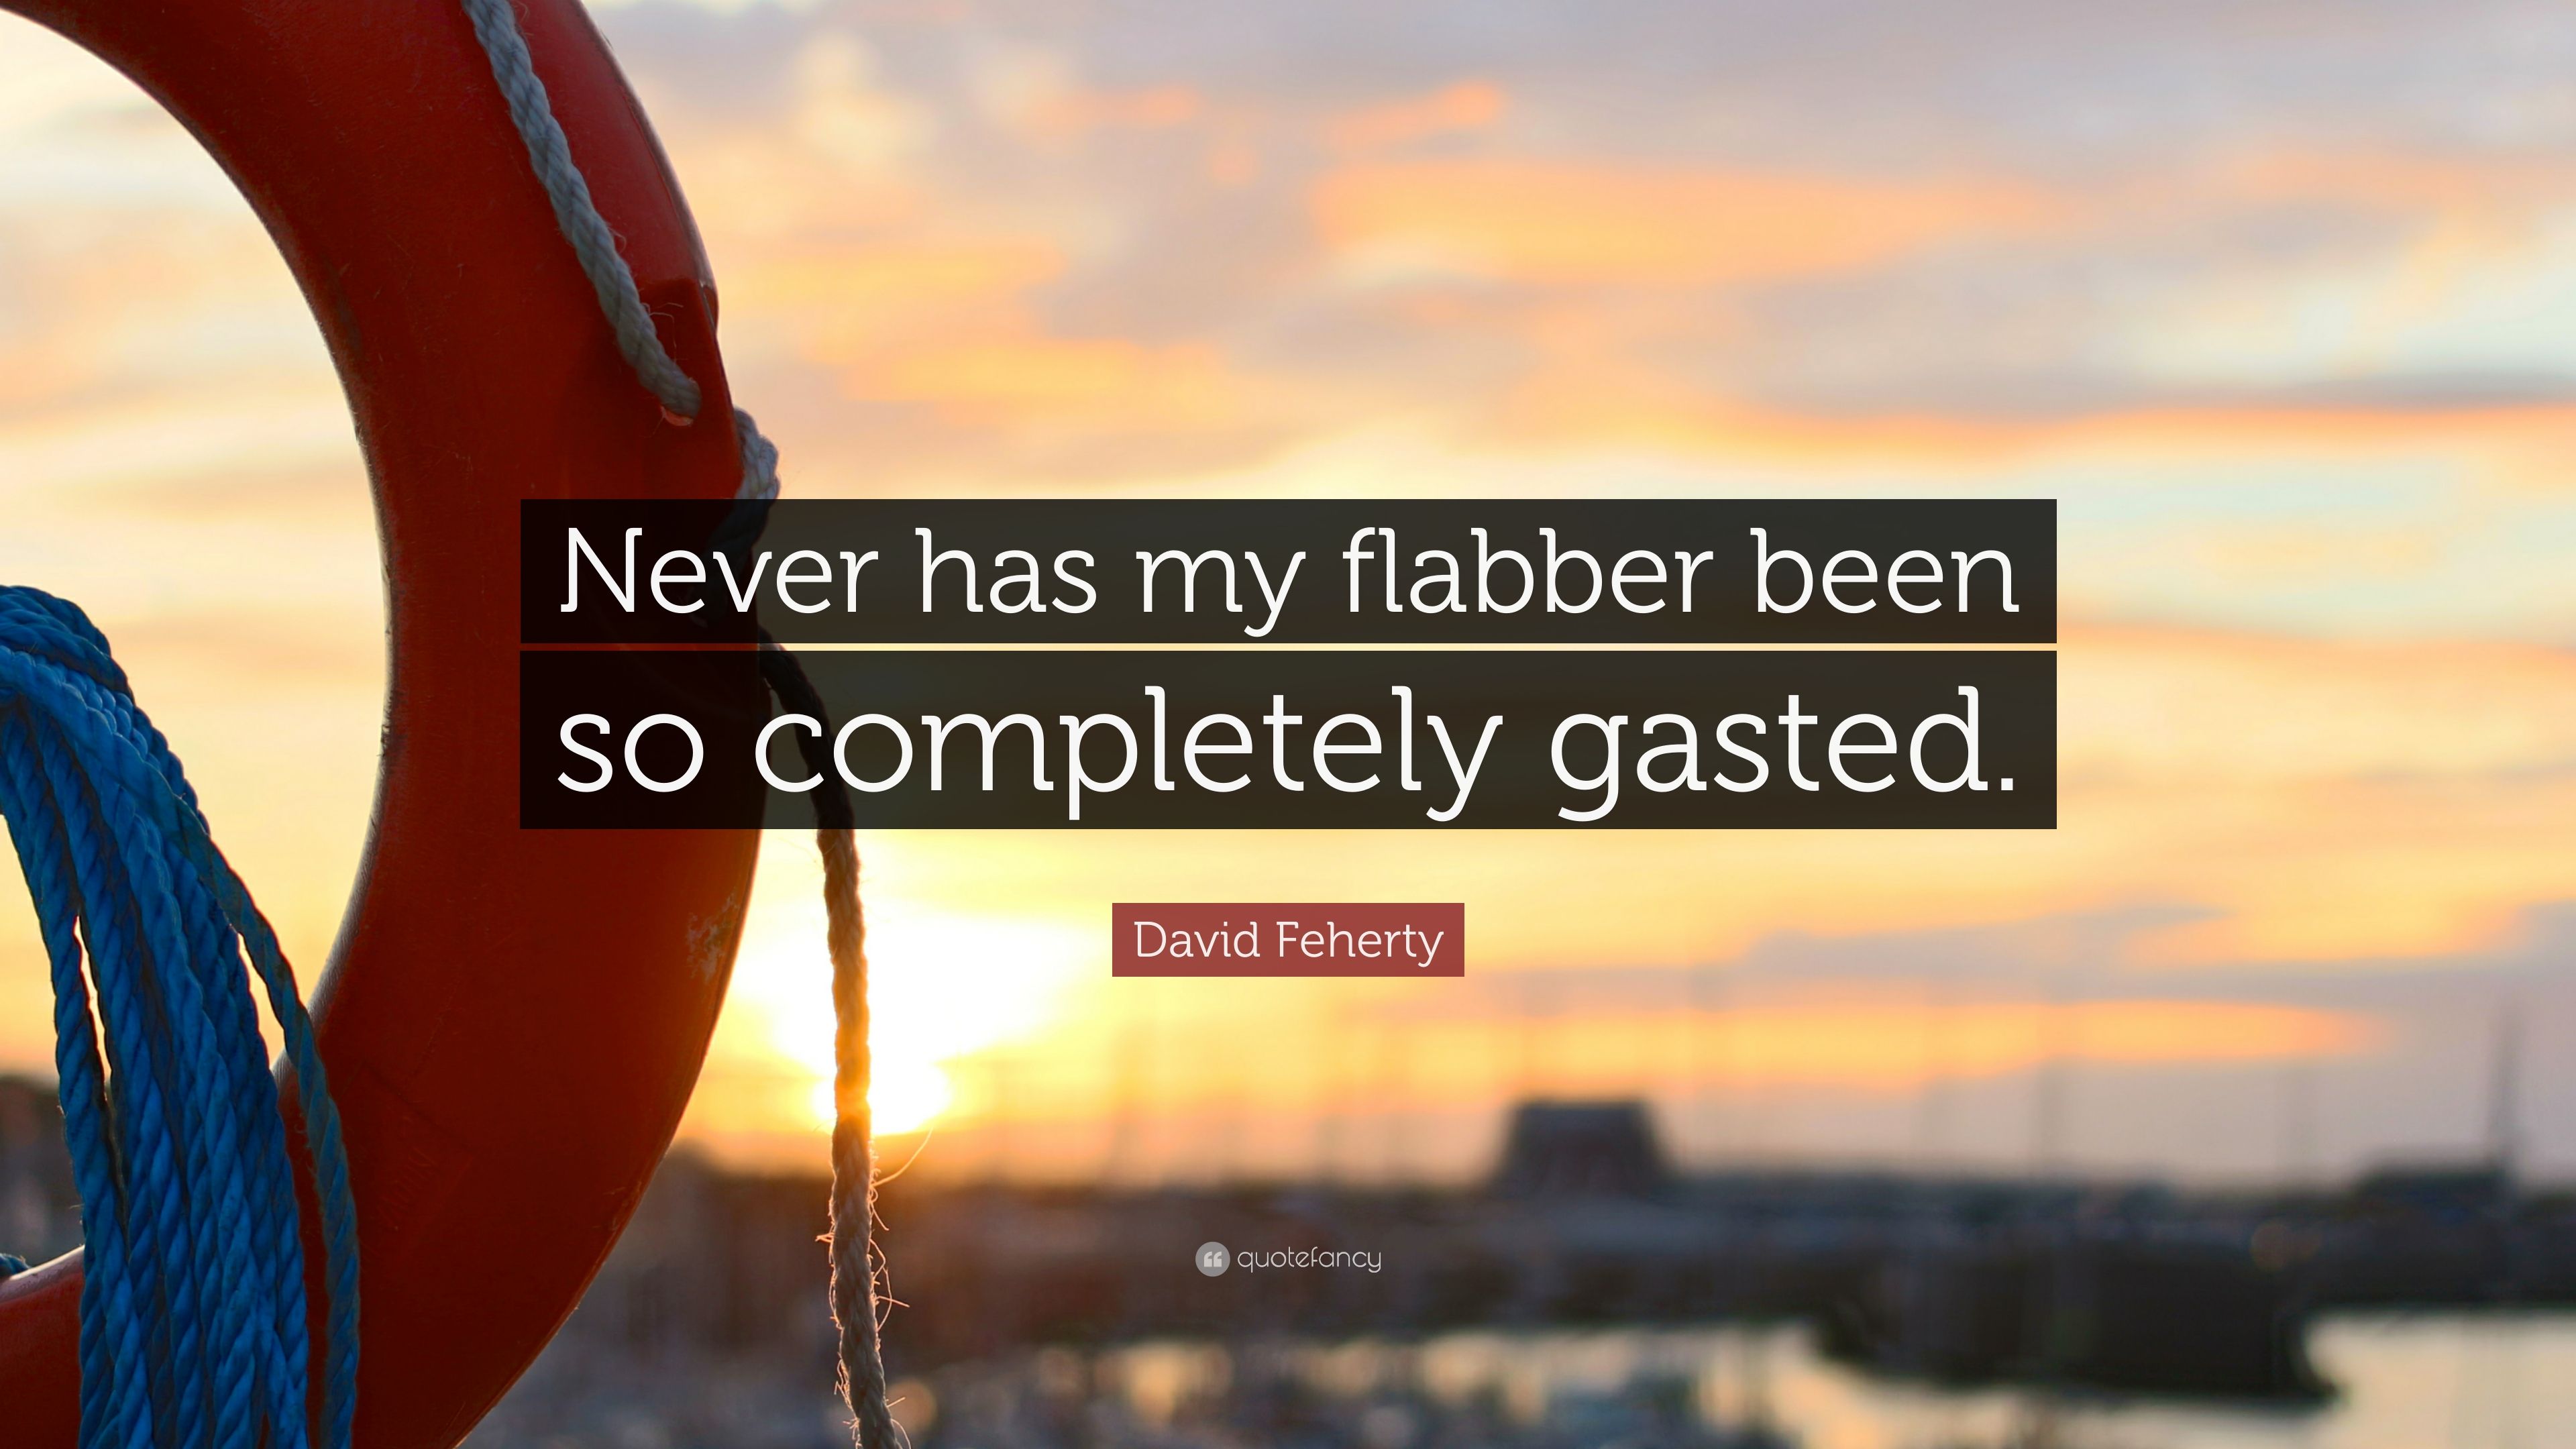 David Feherty Quote - Before You Invest In Something Invest In Time , HD Wallpaper & Backgrounds